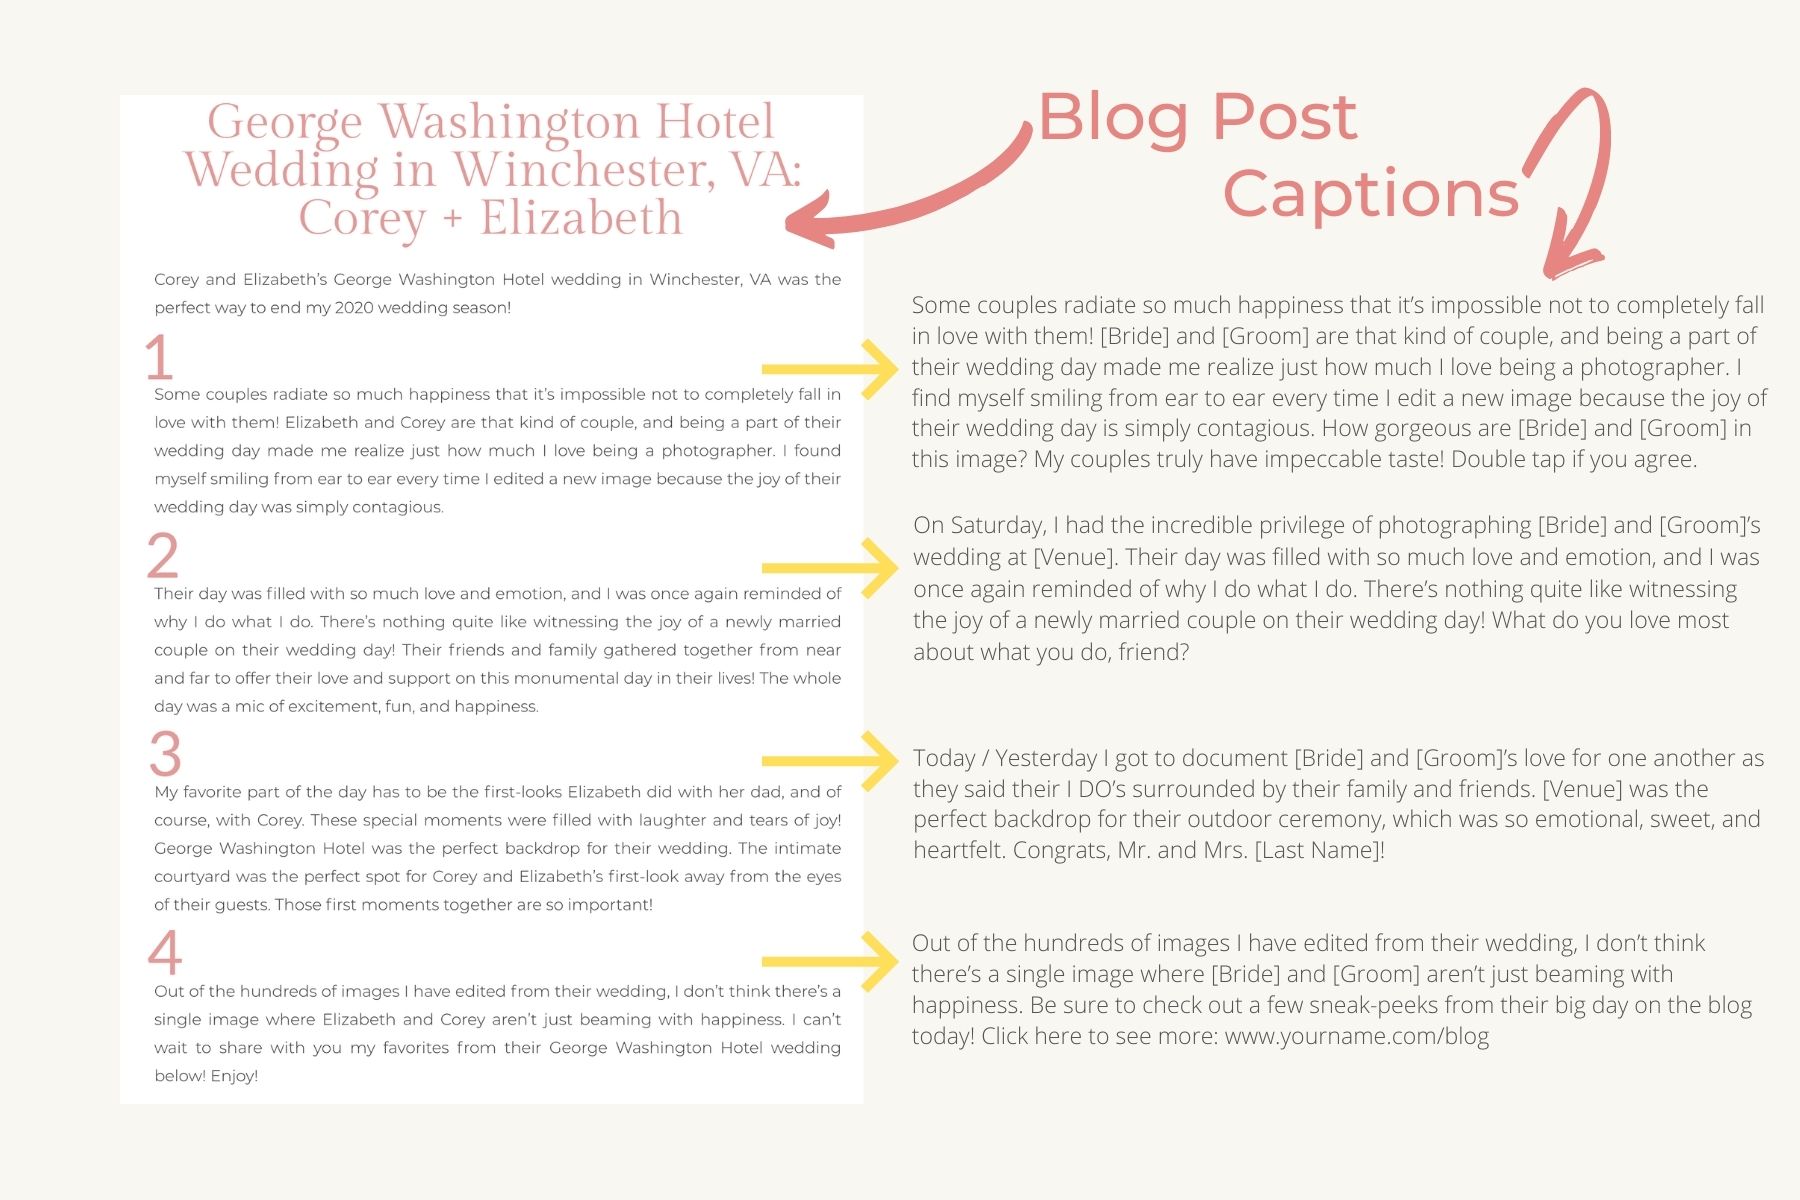 How to Turn Instagram Captions into Blog Posts